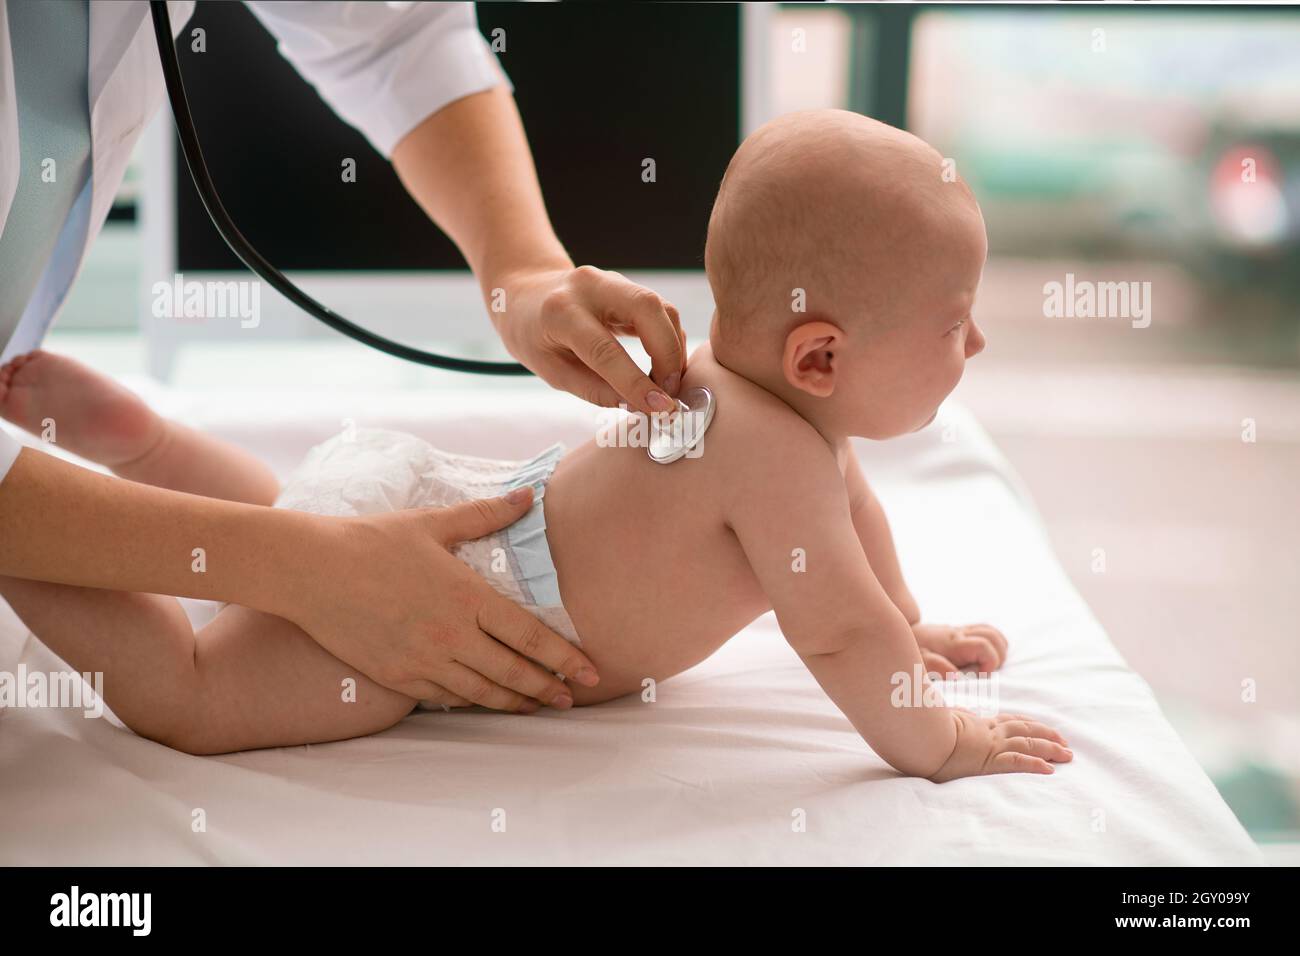 Newborn Caucasian patient being examined with a sterile stethoscope Stock Photo